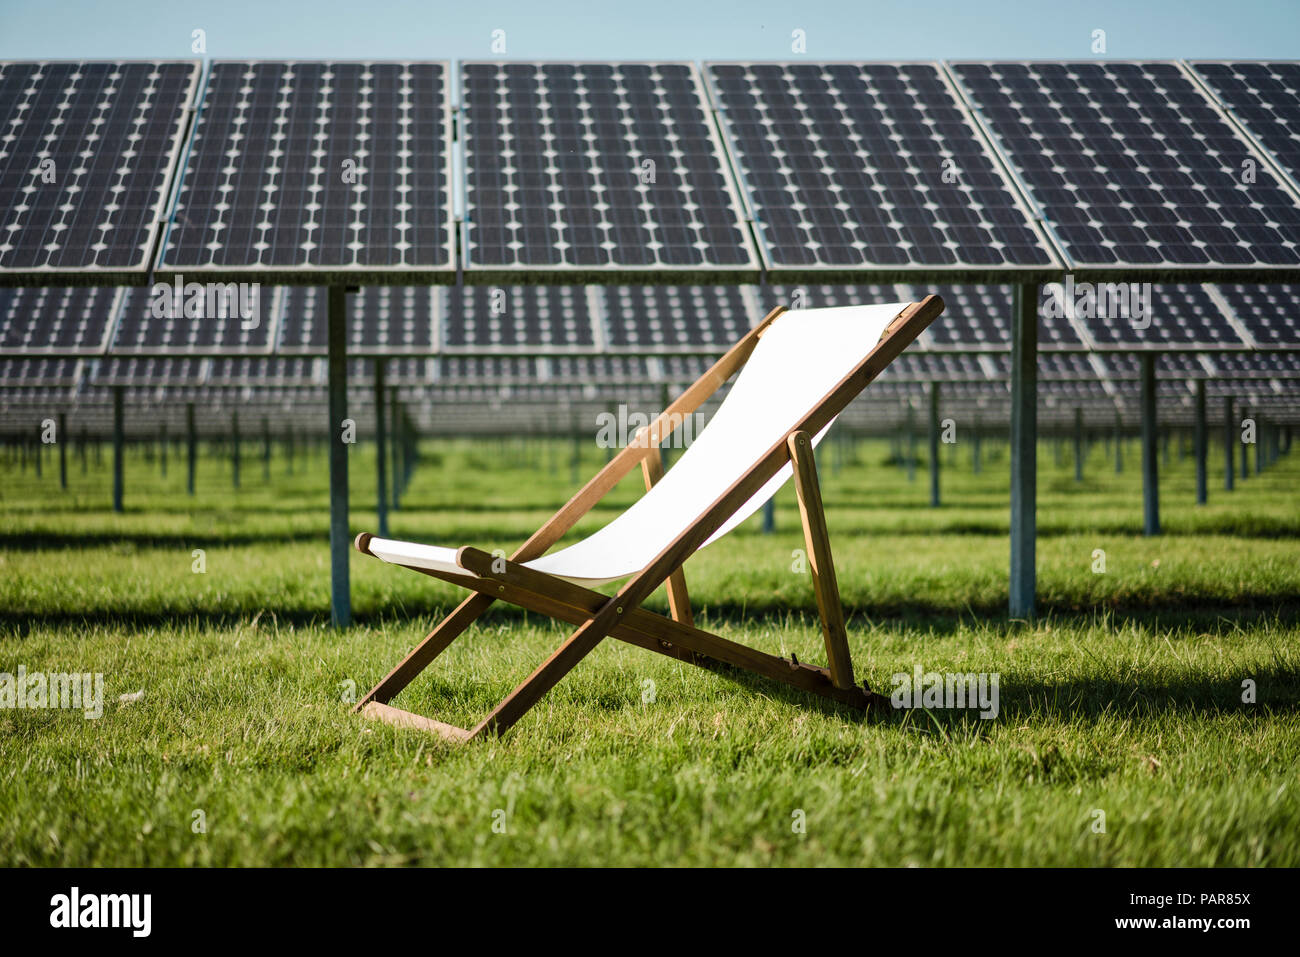 Germany, Kevelaer, solar plant and beach lounger Stock Photo